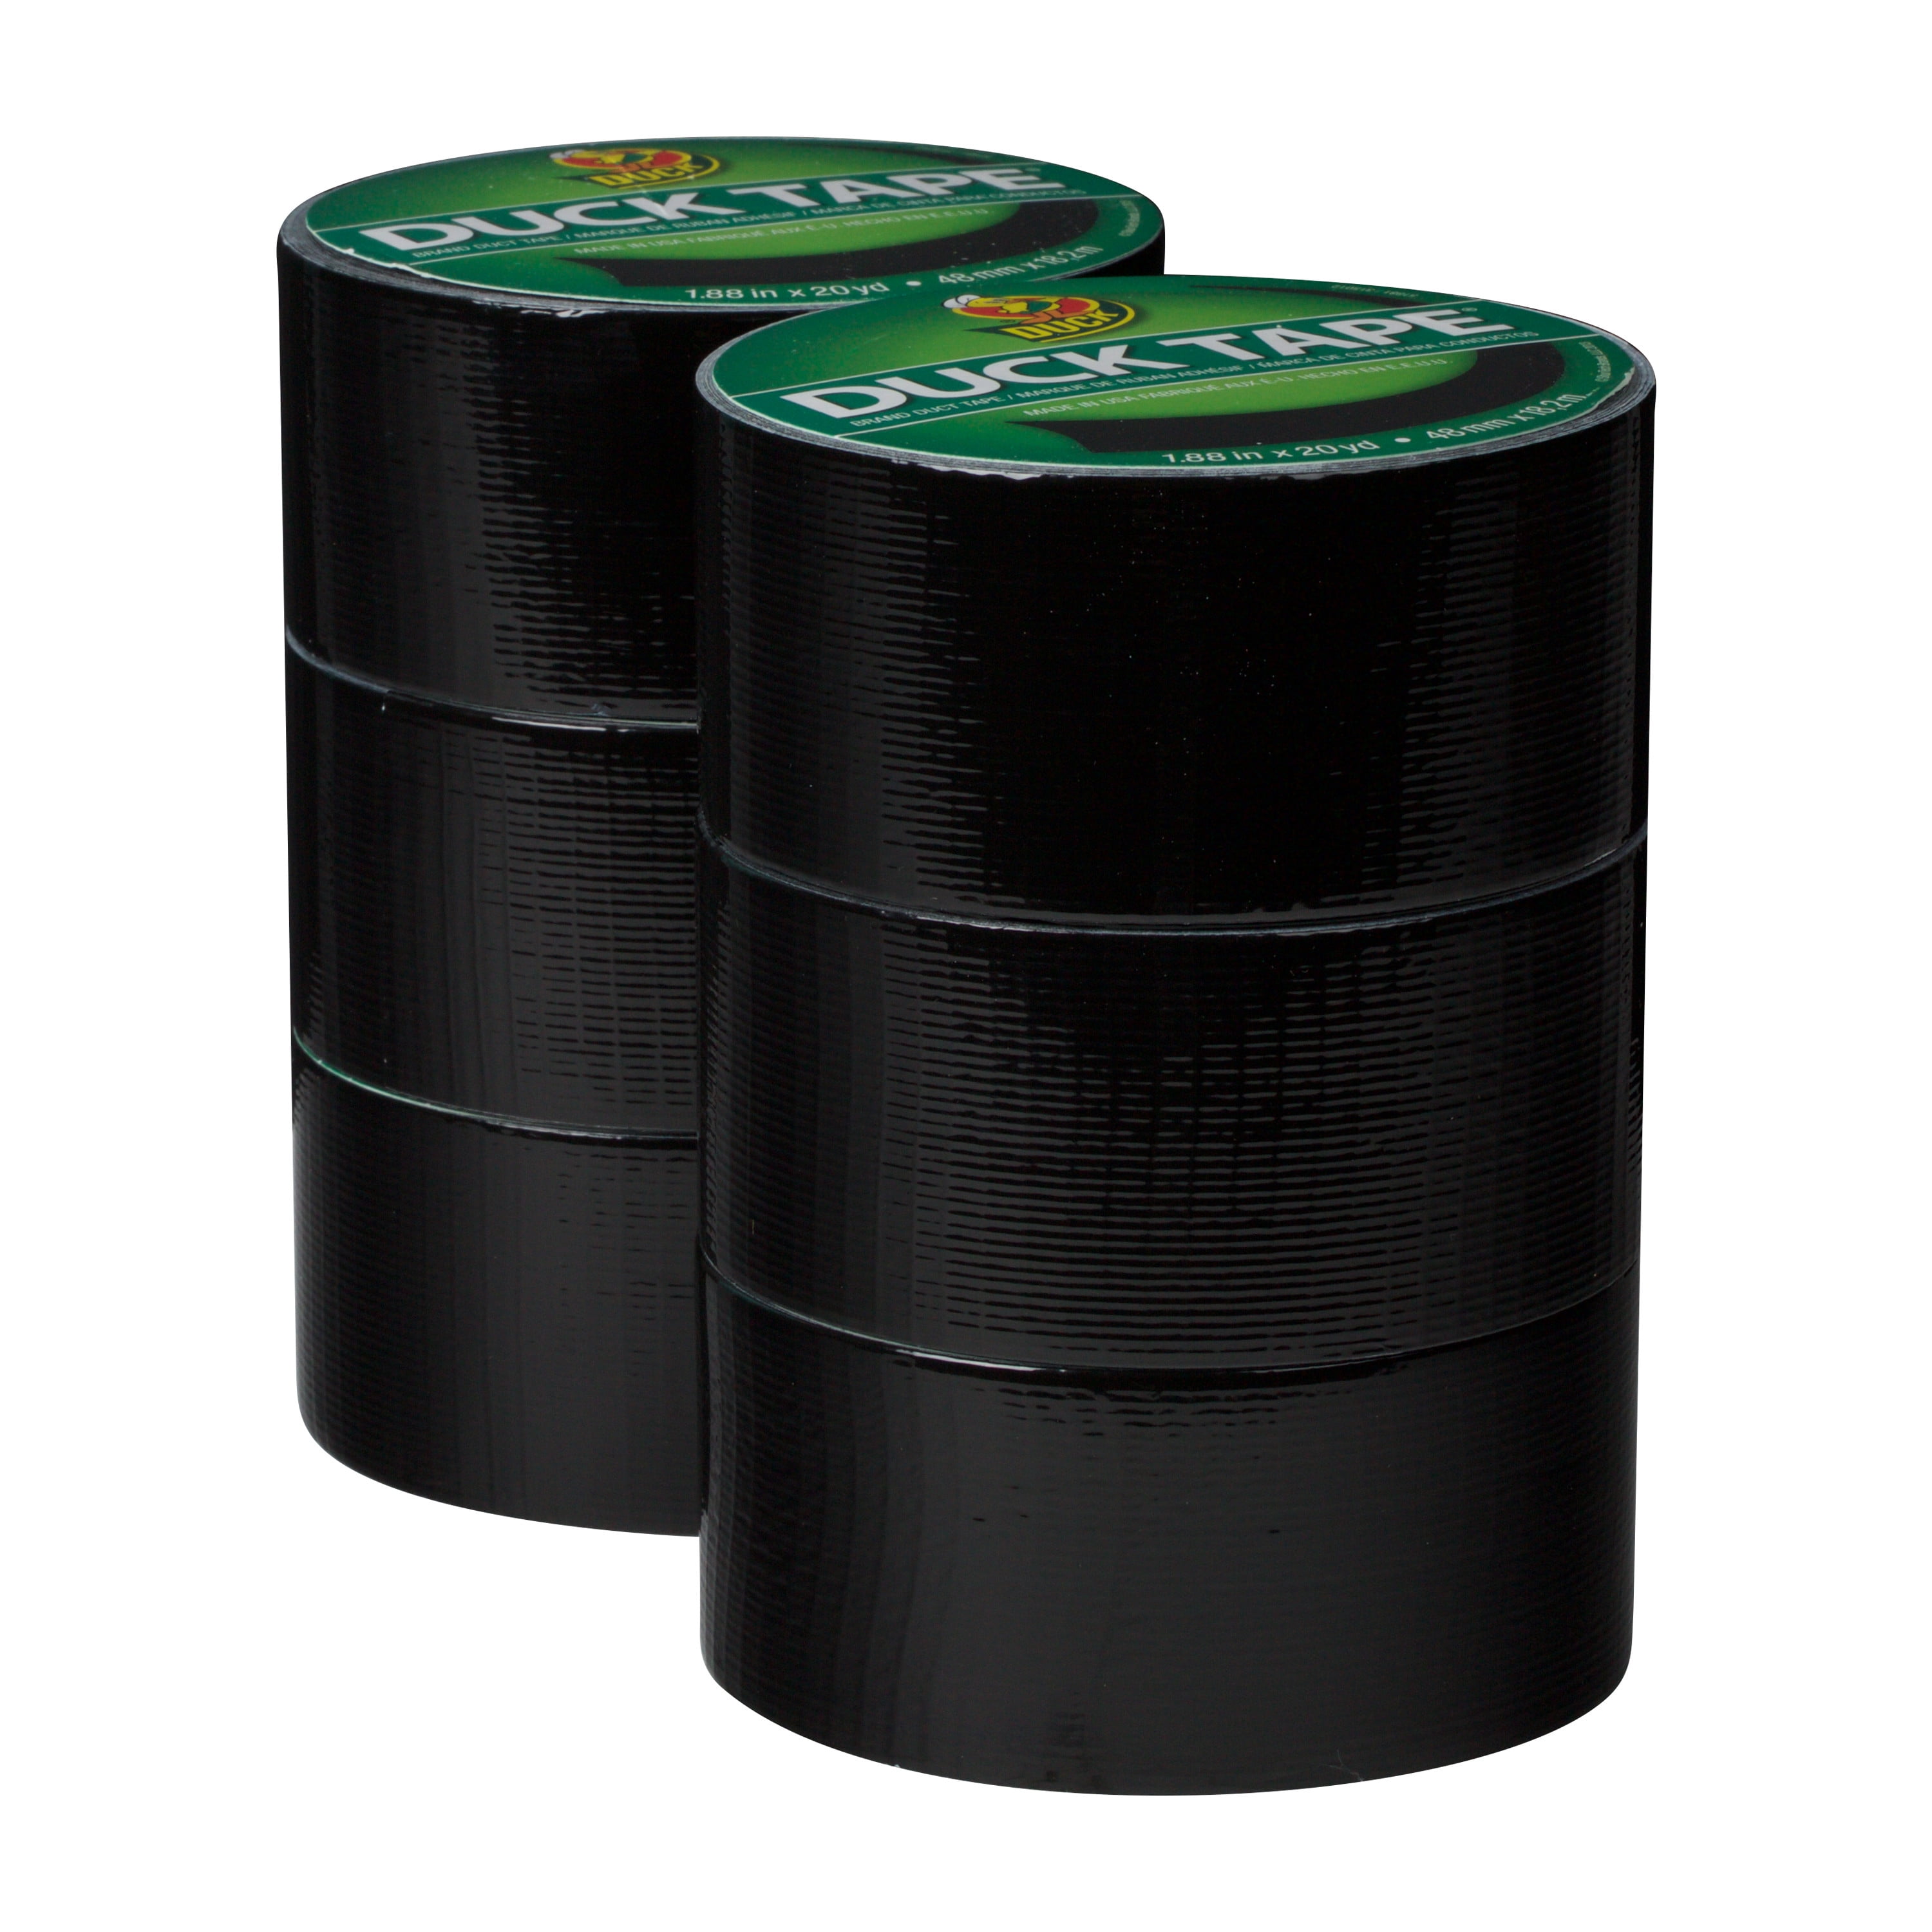 Duck Carbon fibre Printed Duct Tape, 1.88 inch x 10 yds.